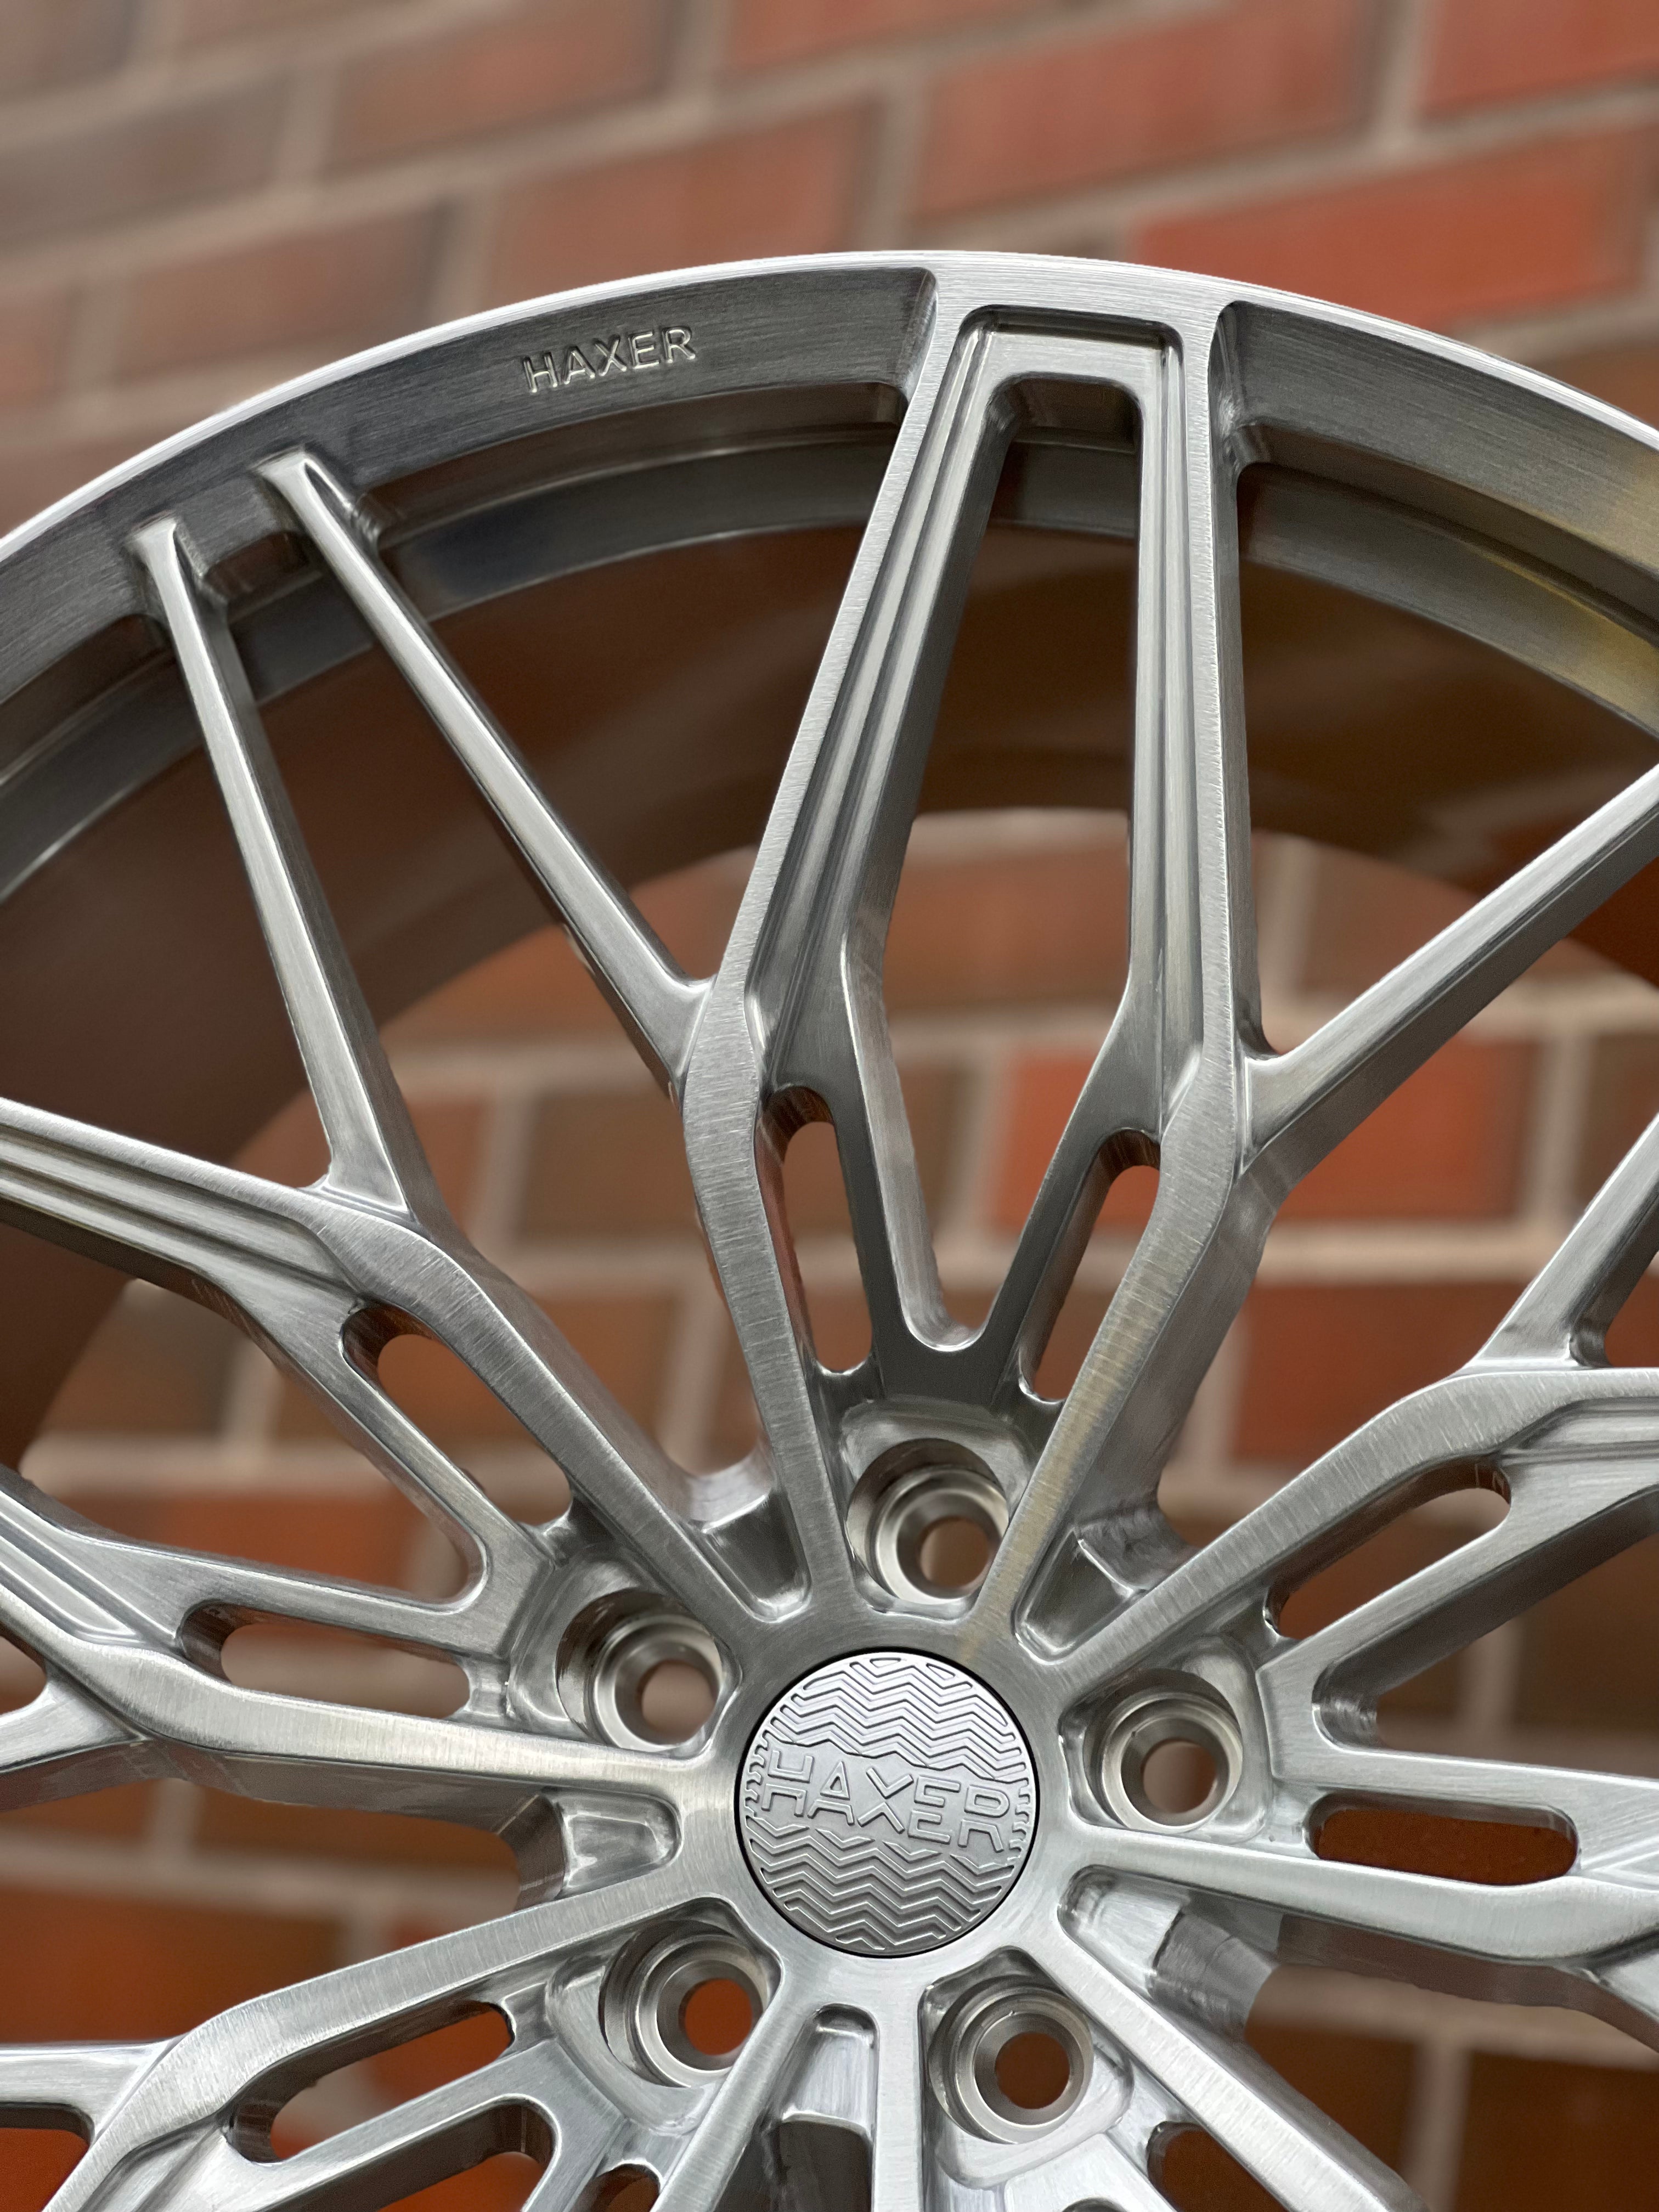 HAXER Forged HXF-02 Silver Brushed